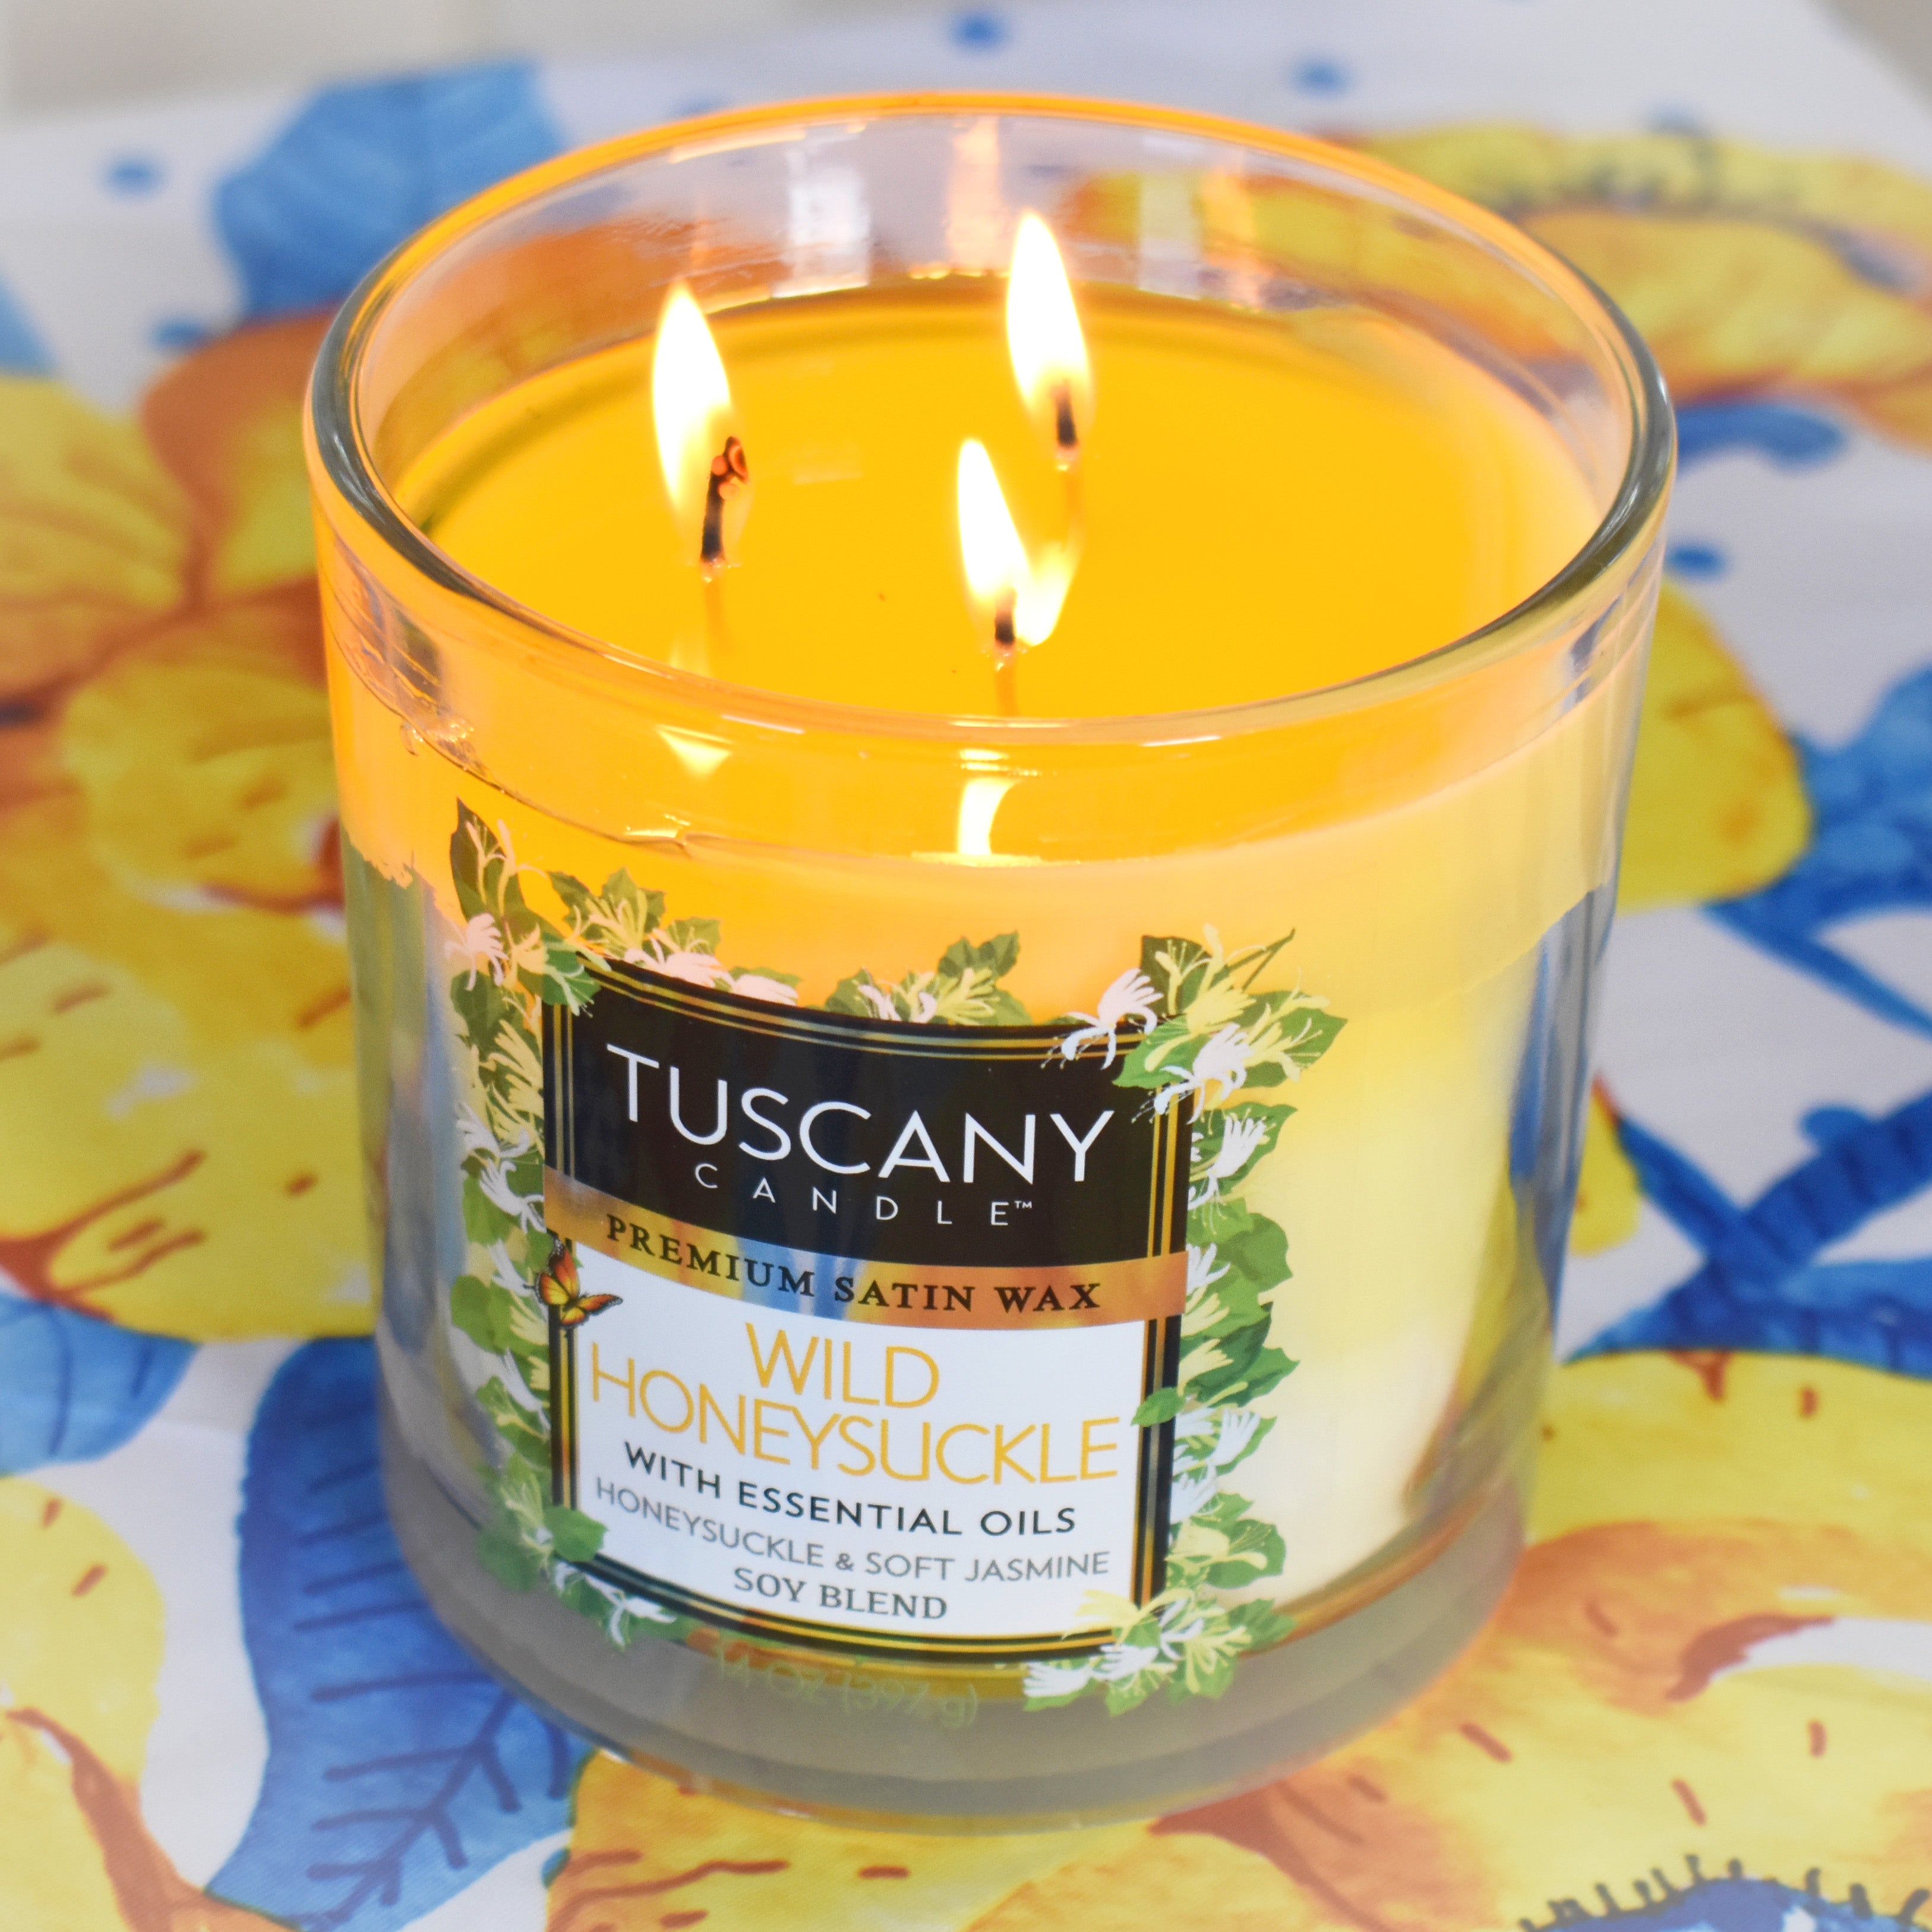 This Tuscany Candle Wild Honeysuckle Long-Lasting Scented Jar Candle (14 oz) captures the essence of wild honeysuckle from Tuscany, with its captivating fragrance filling any space with a delightful aroma.